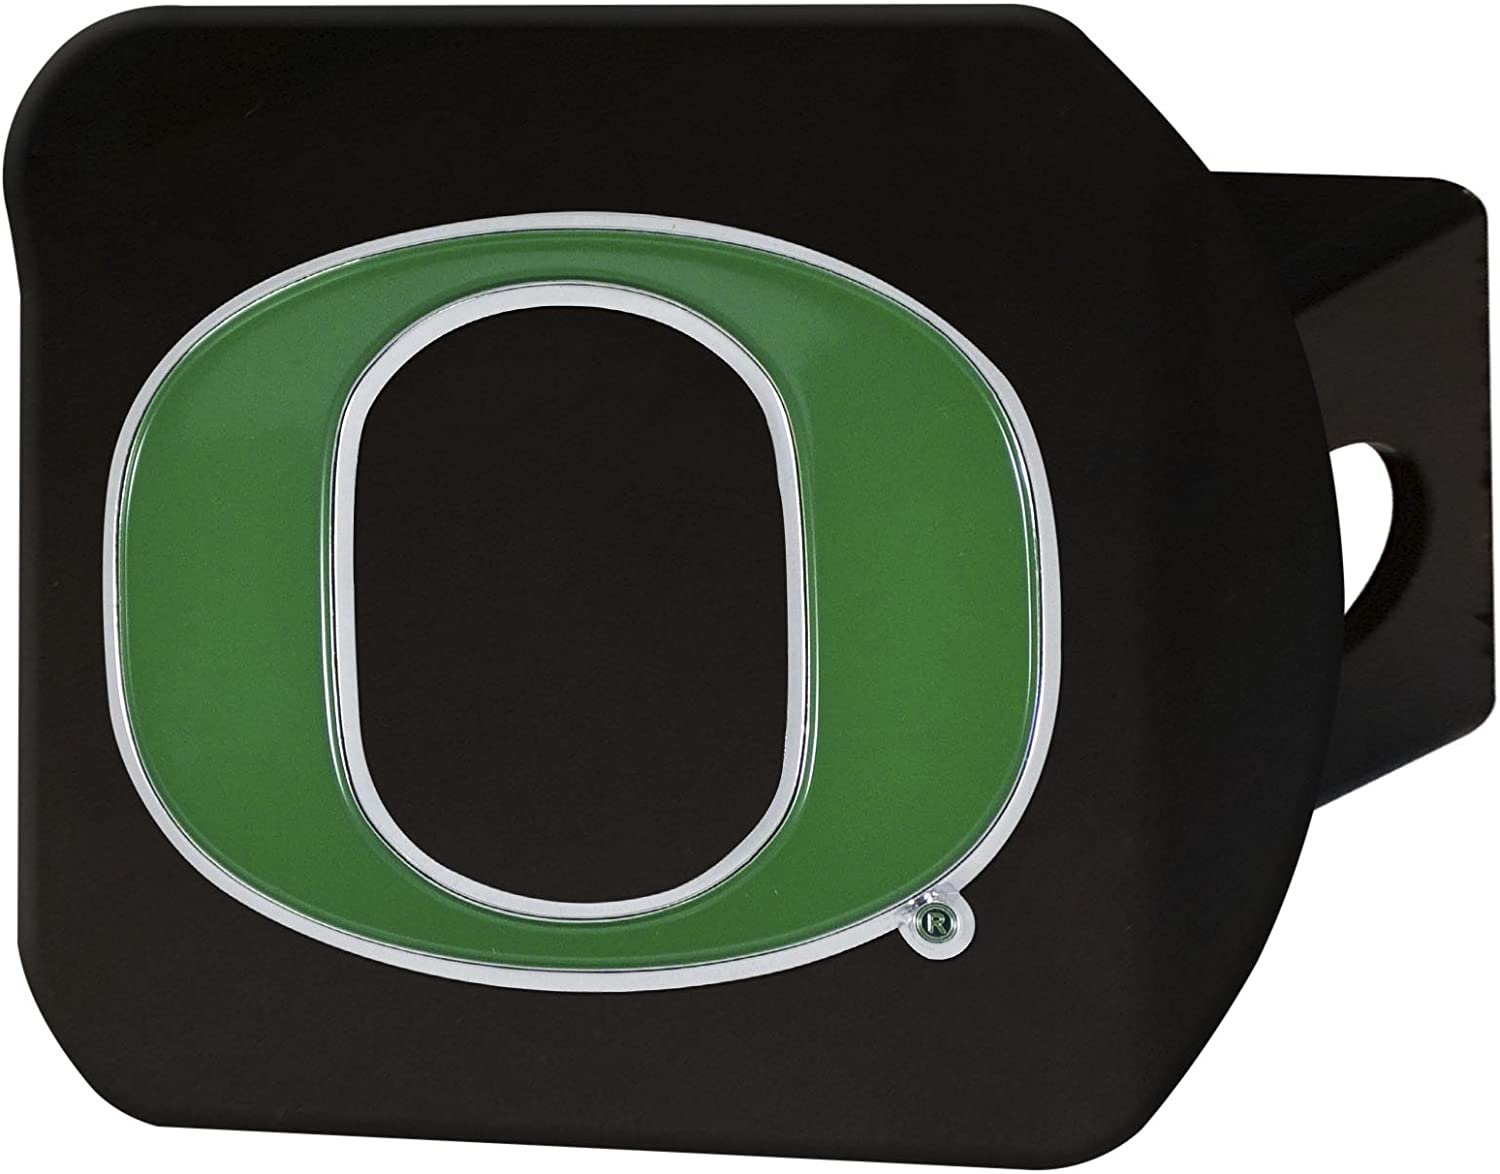 Oregon Ducks Solid Metal Black Hitch Cover with Color Metal Emblem 2 Inch Square Type III University of